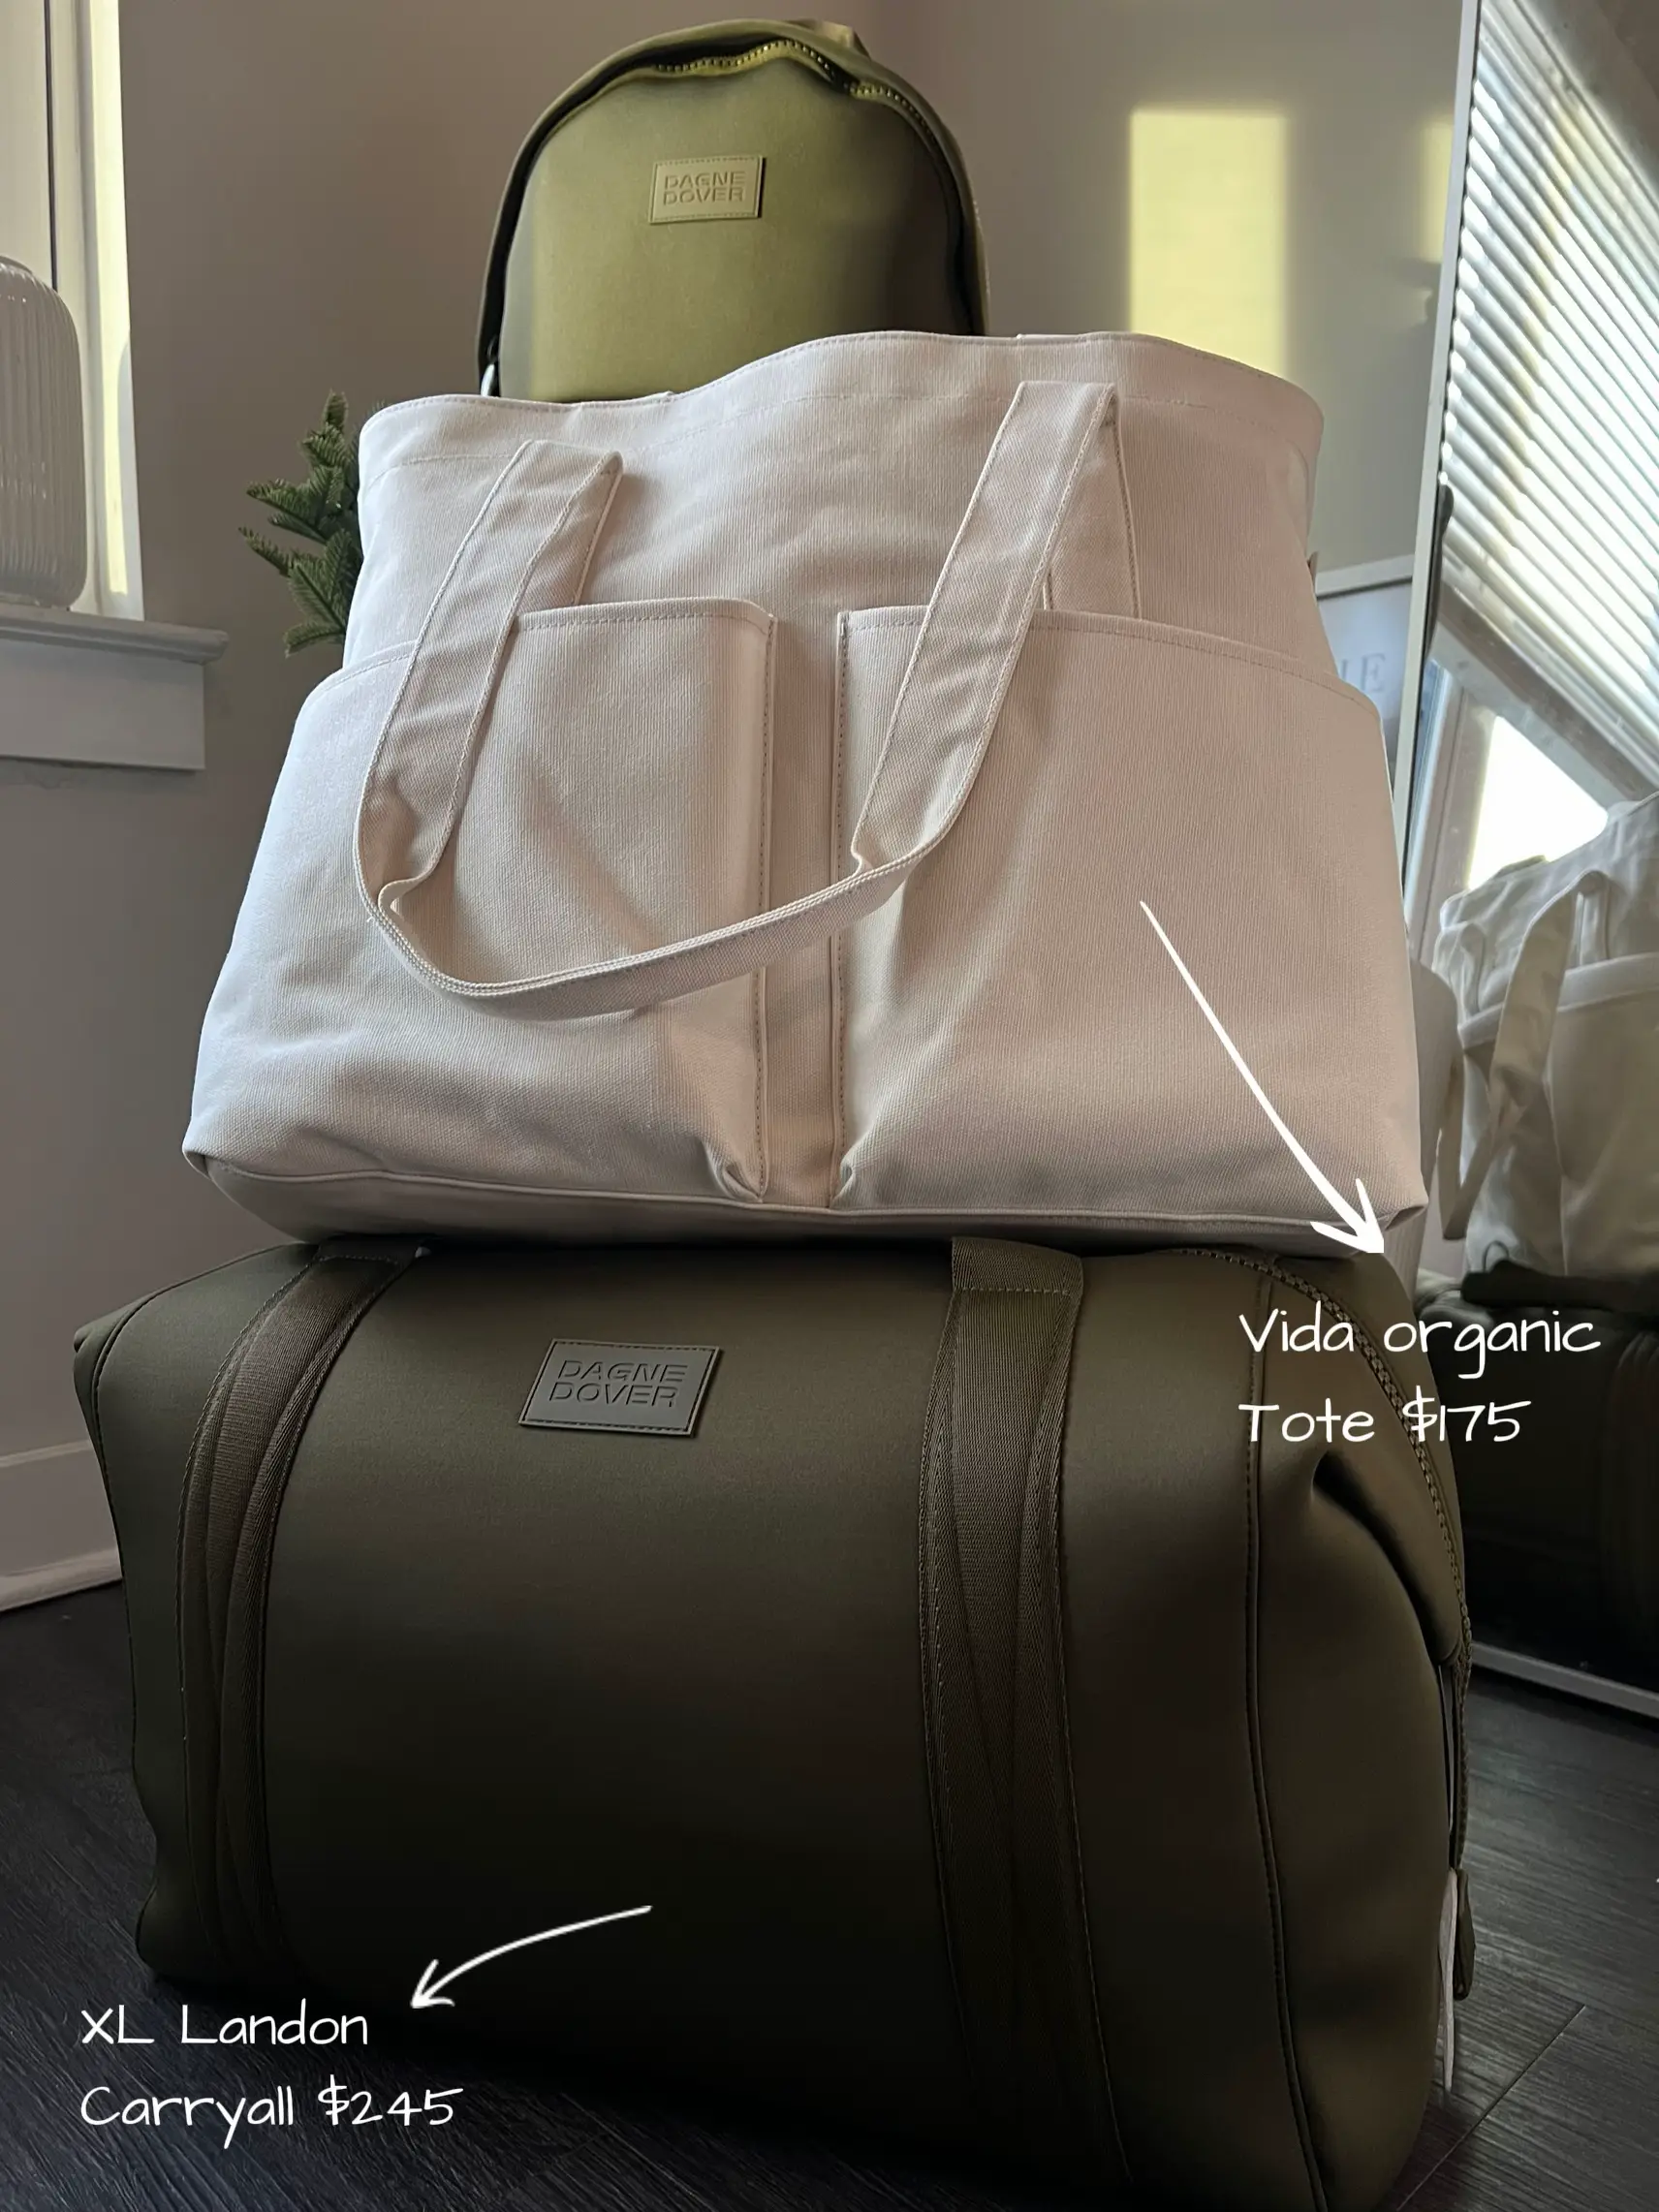 Most spacious travel bags from Dagne Dover, Gallery posted by Kanchana